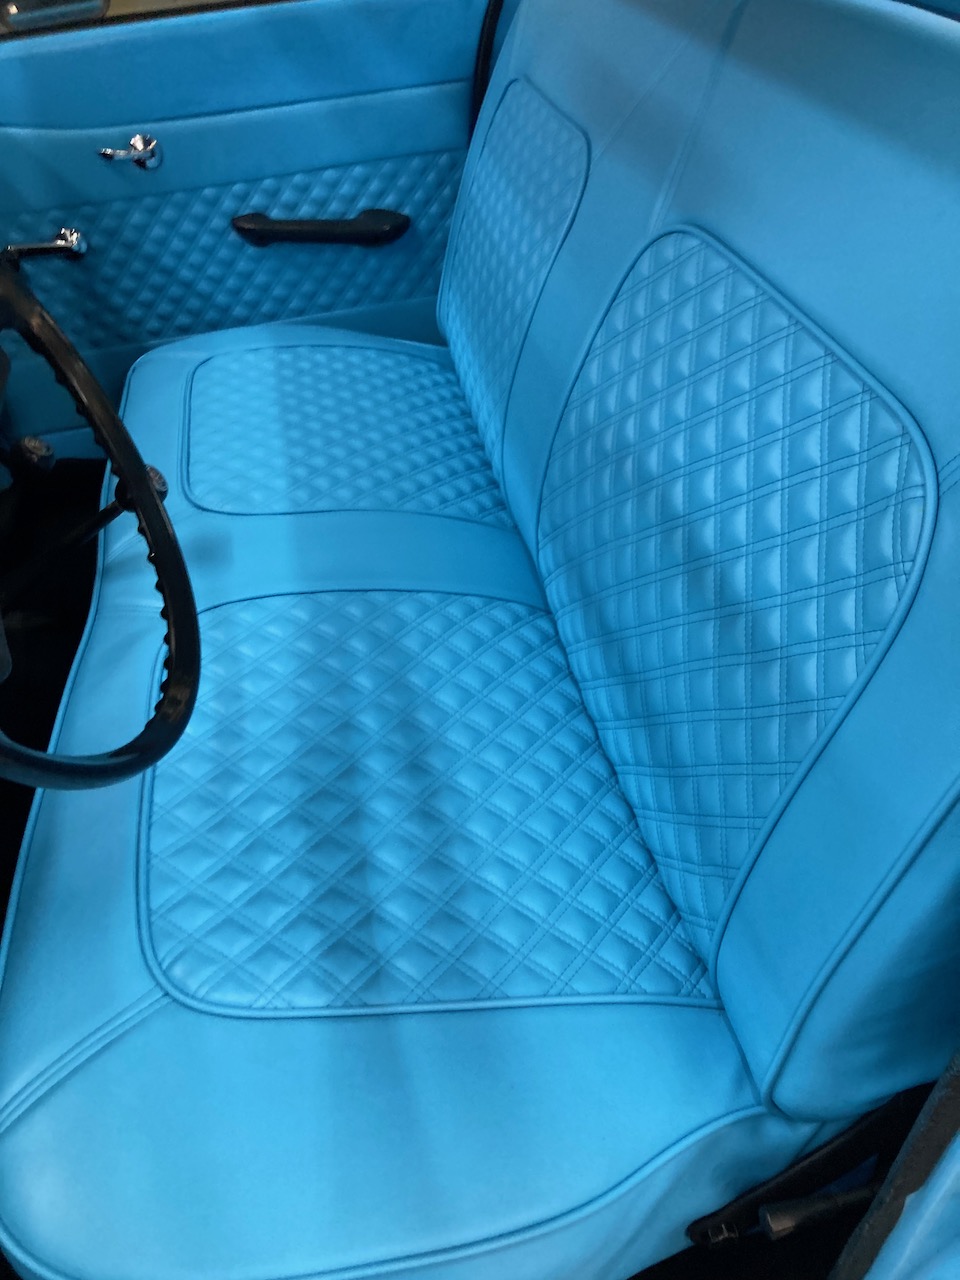 Automobile Upholstery Restoration - Blue Interior Car Upholstery